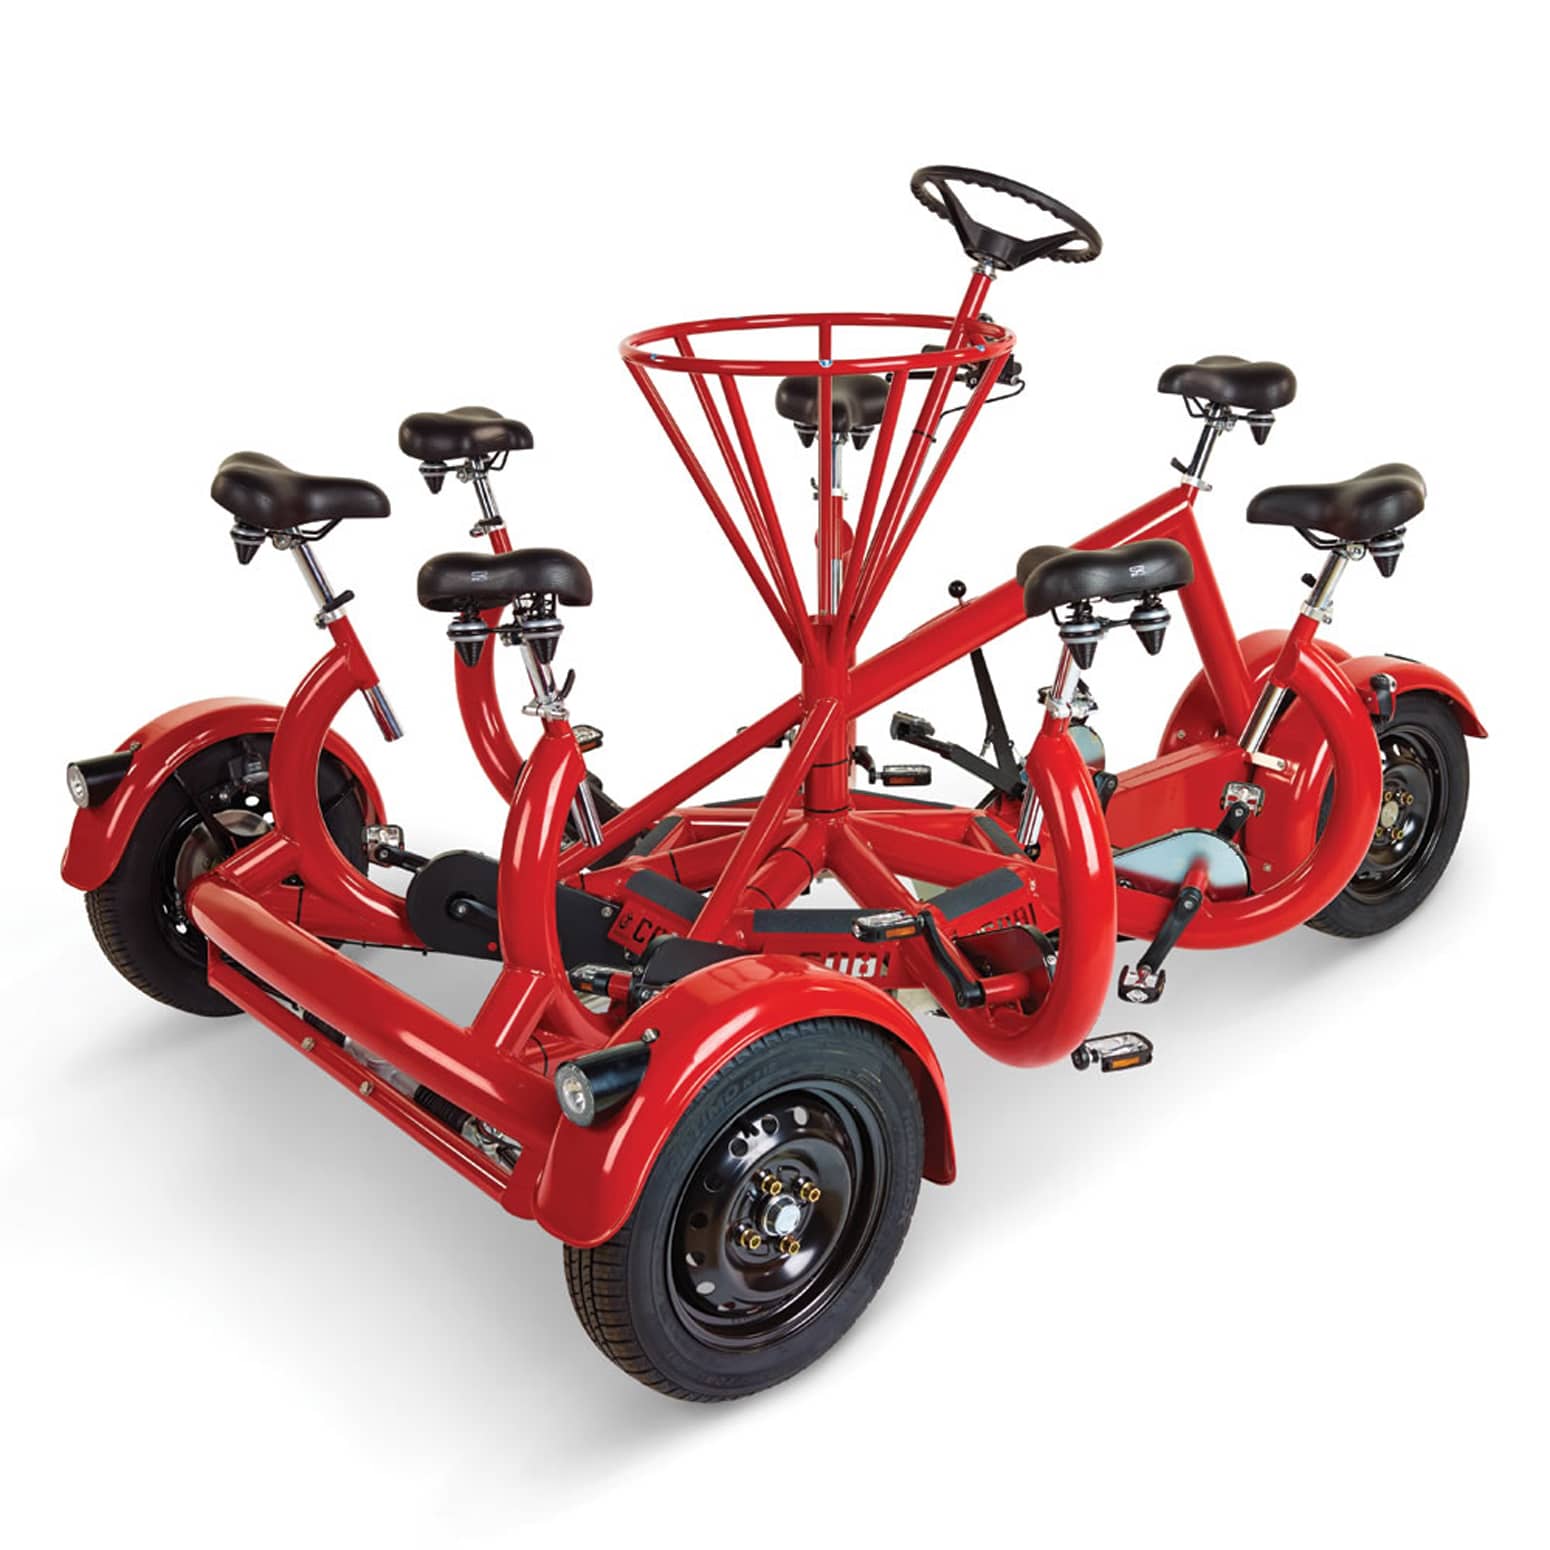 Conference Bike - Seven Person Tricycle